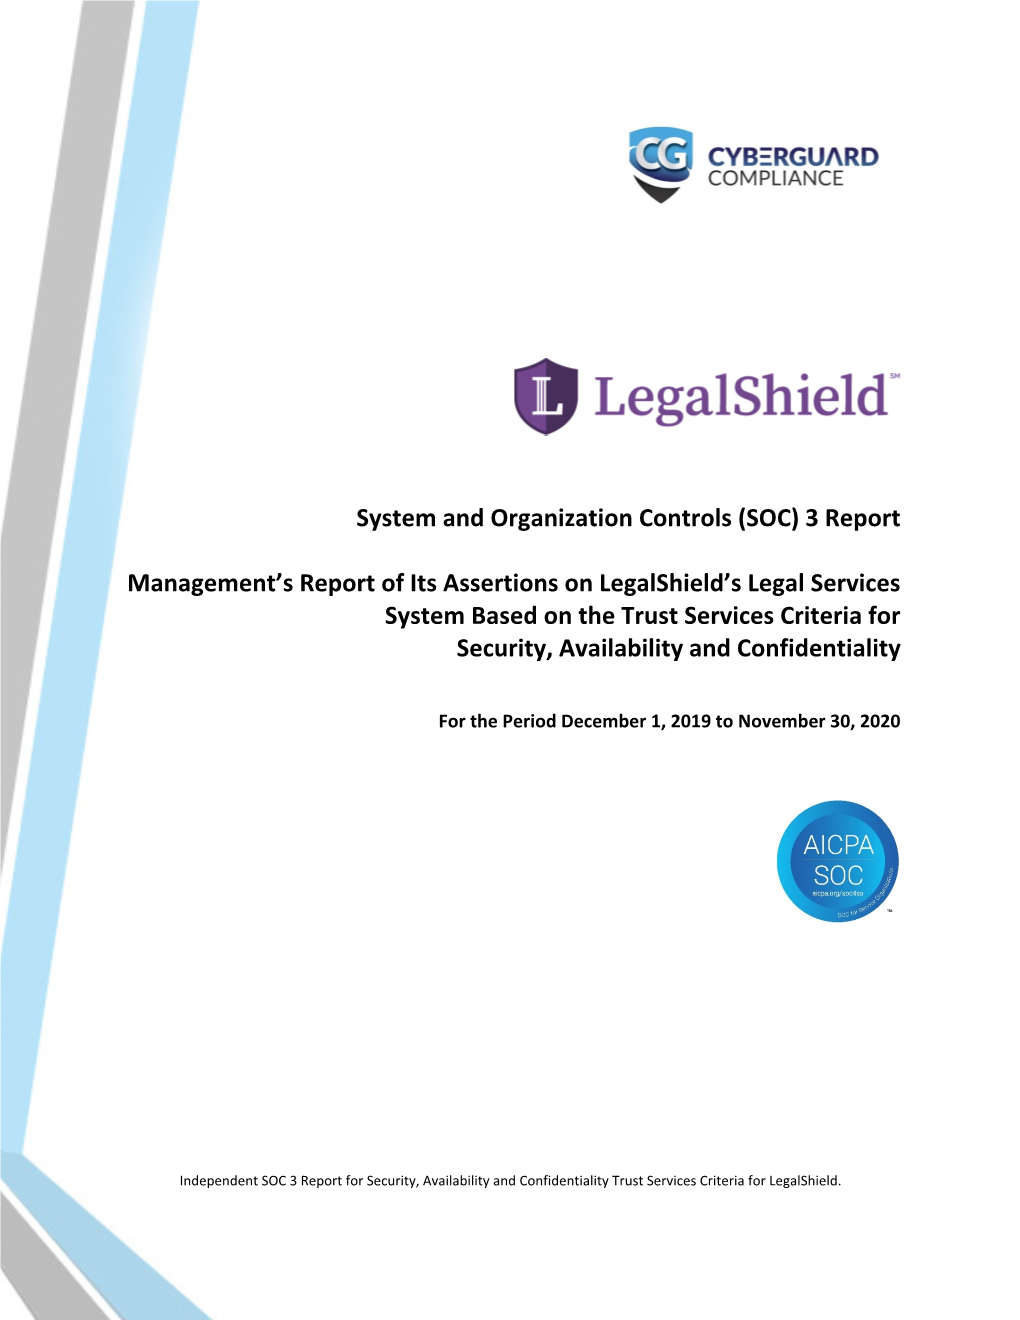 3 Report Management's Report of Its Assertions on Legalshield's Legal